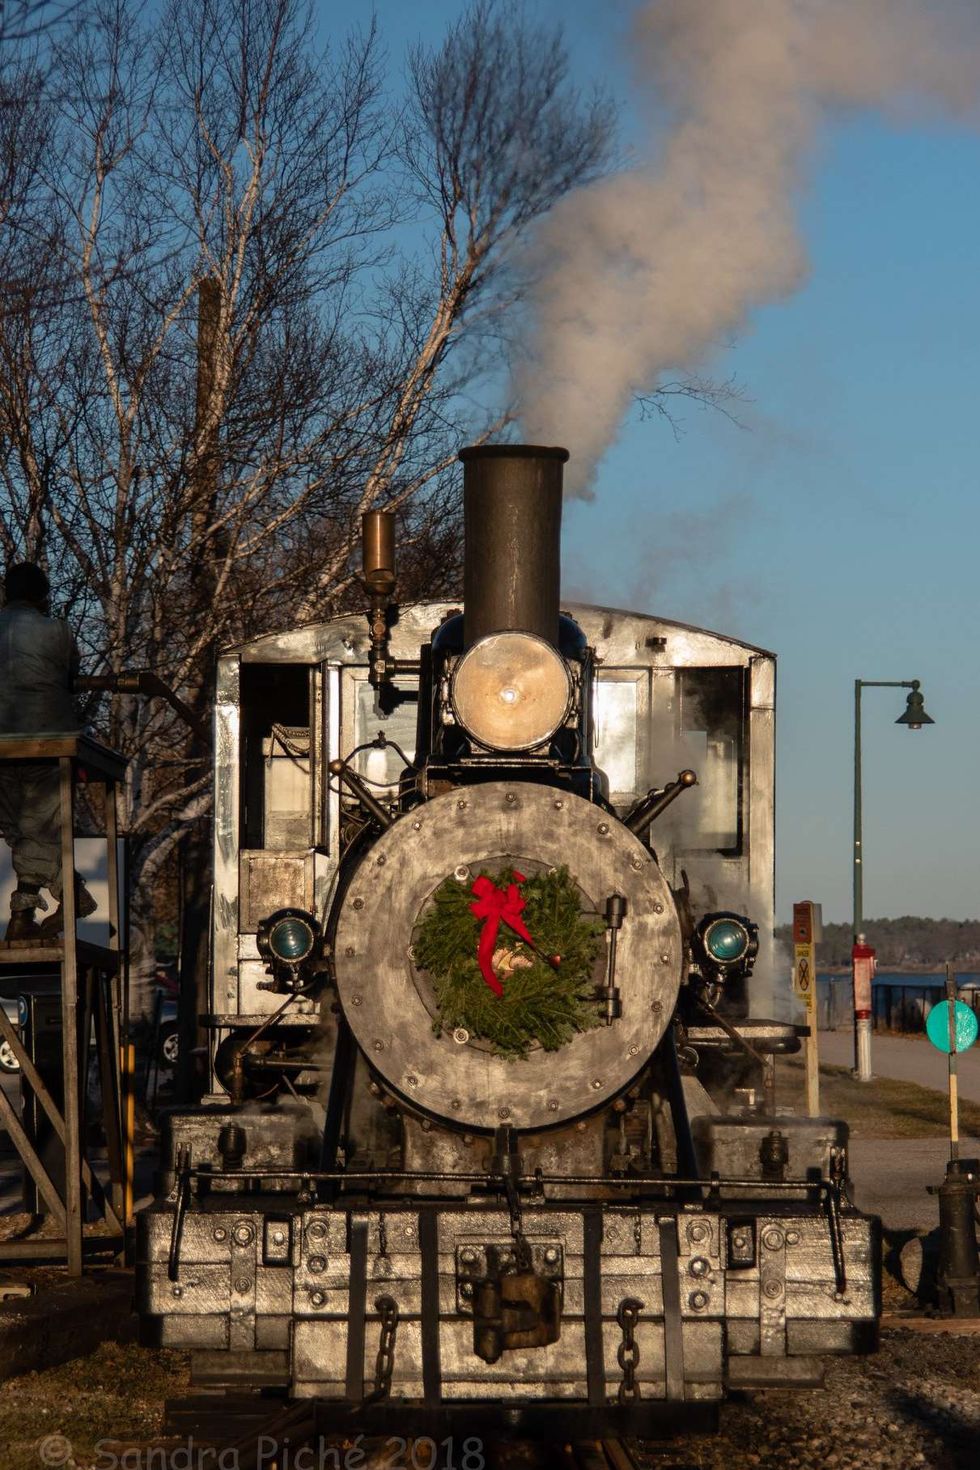 vintage locomotive with headlight on and stream coming out of pipe, with a christmas wreath with a big read bow affixed to the front